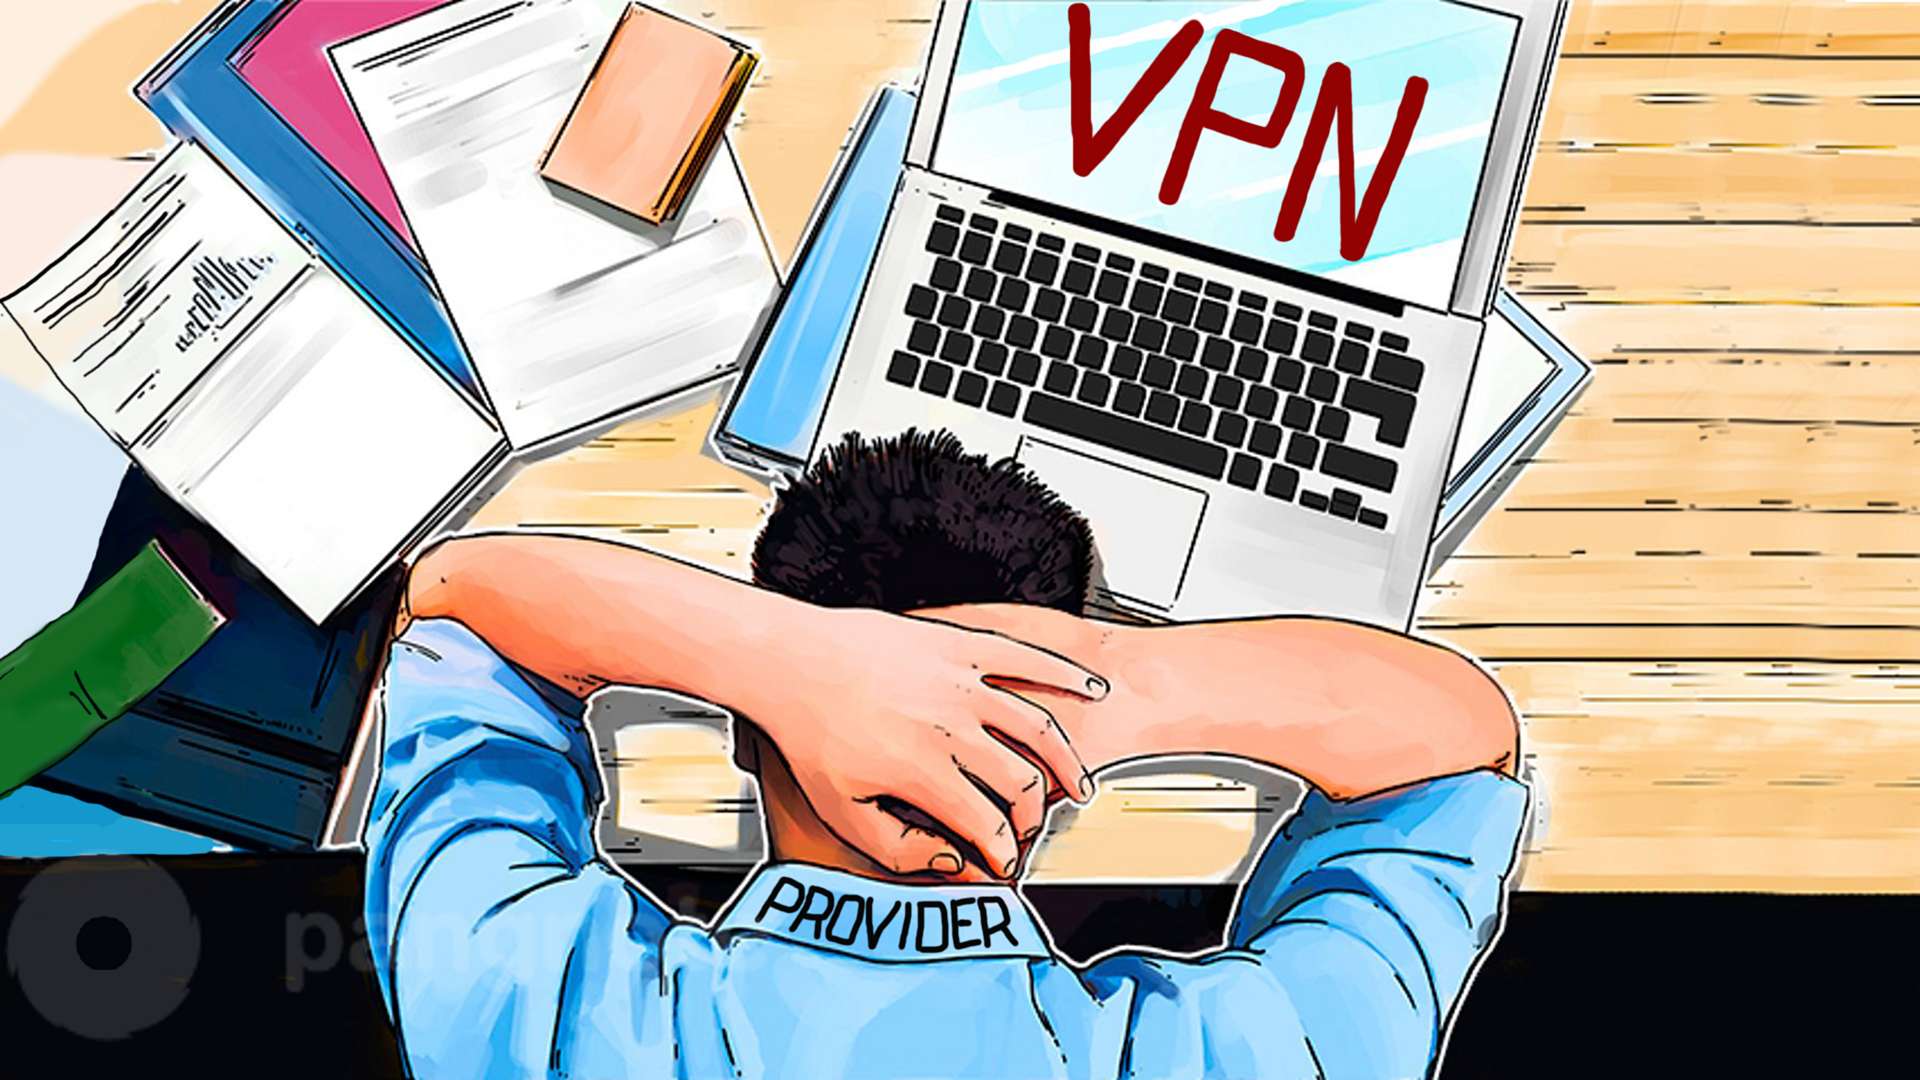 What problems will the VPN provider face?